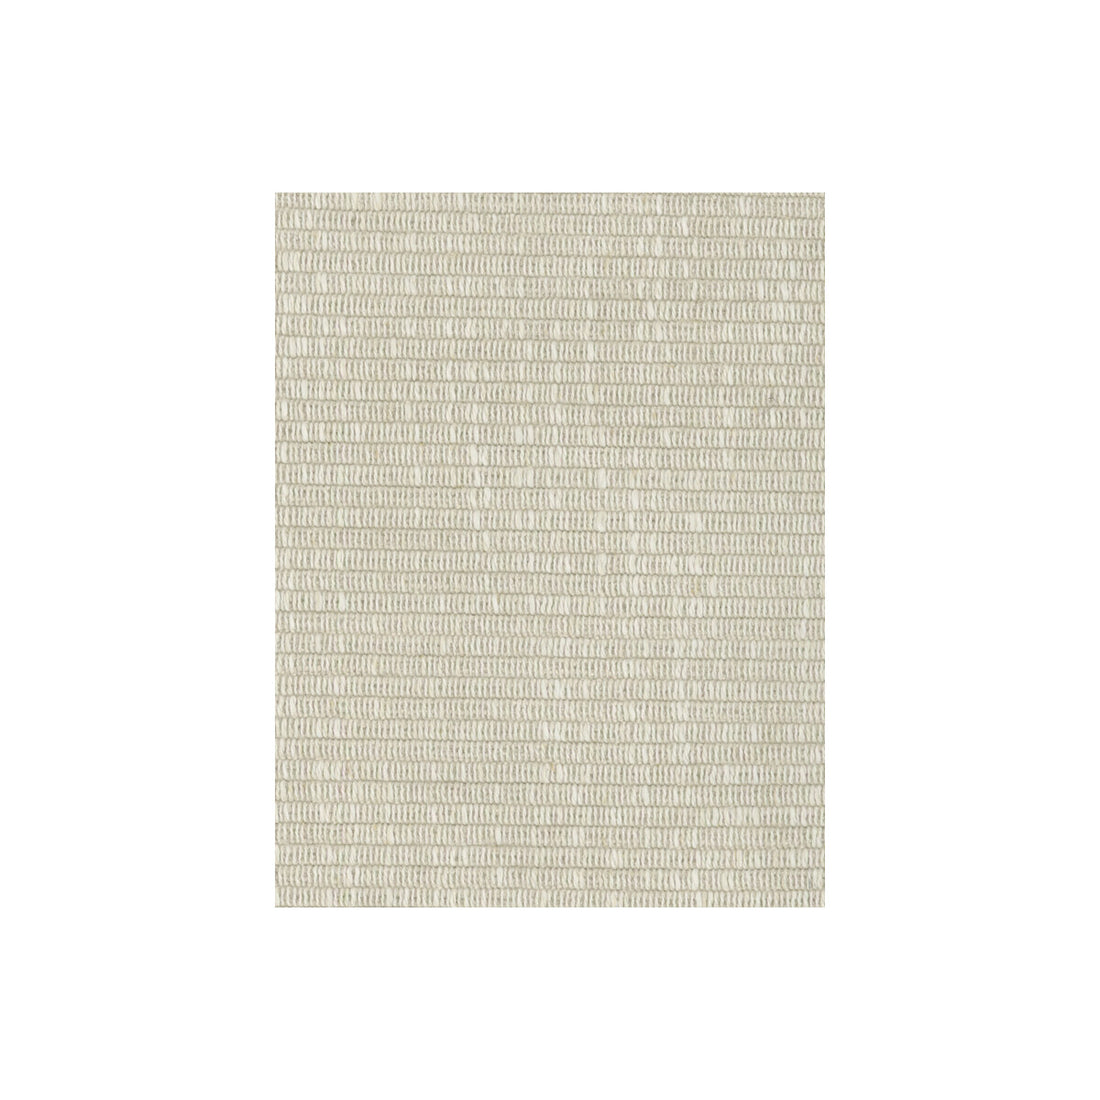 Westbourne fabric in ivory color - pattern AM100054.1.0 - by Kravet Couture in the Andrew Martin Clarendon collection